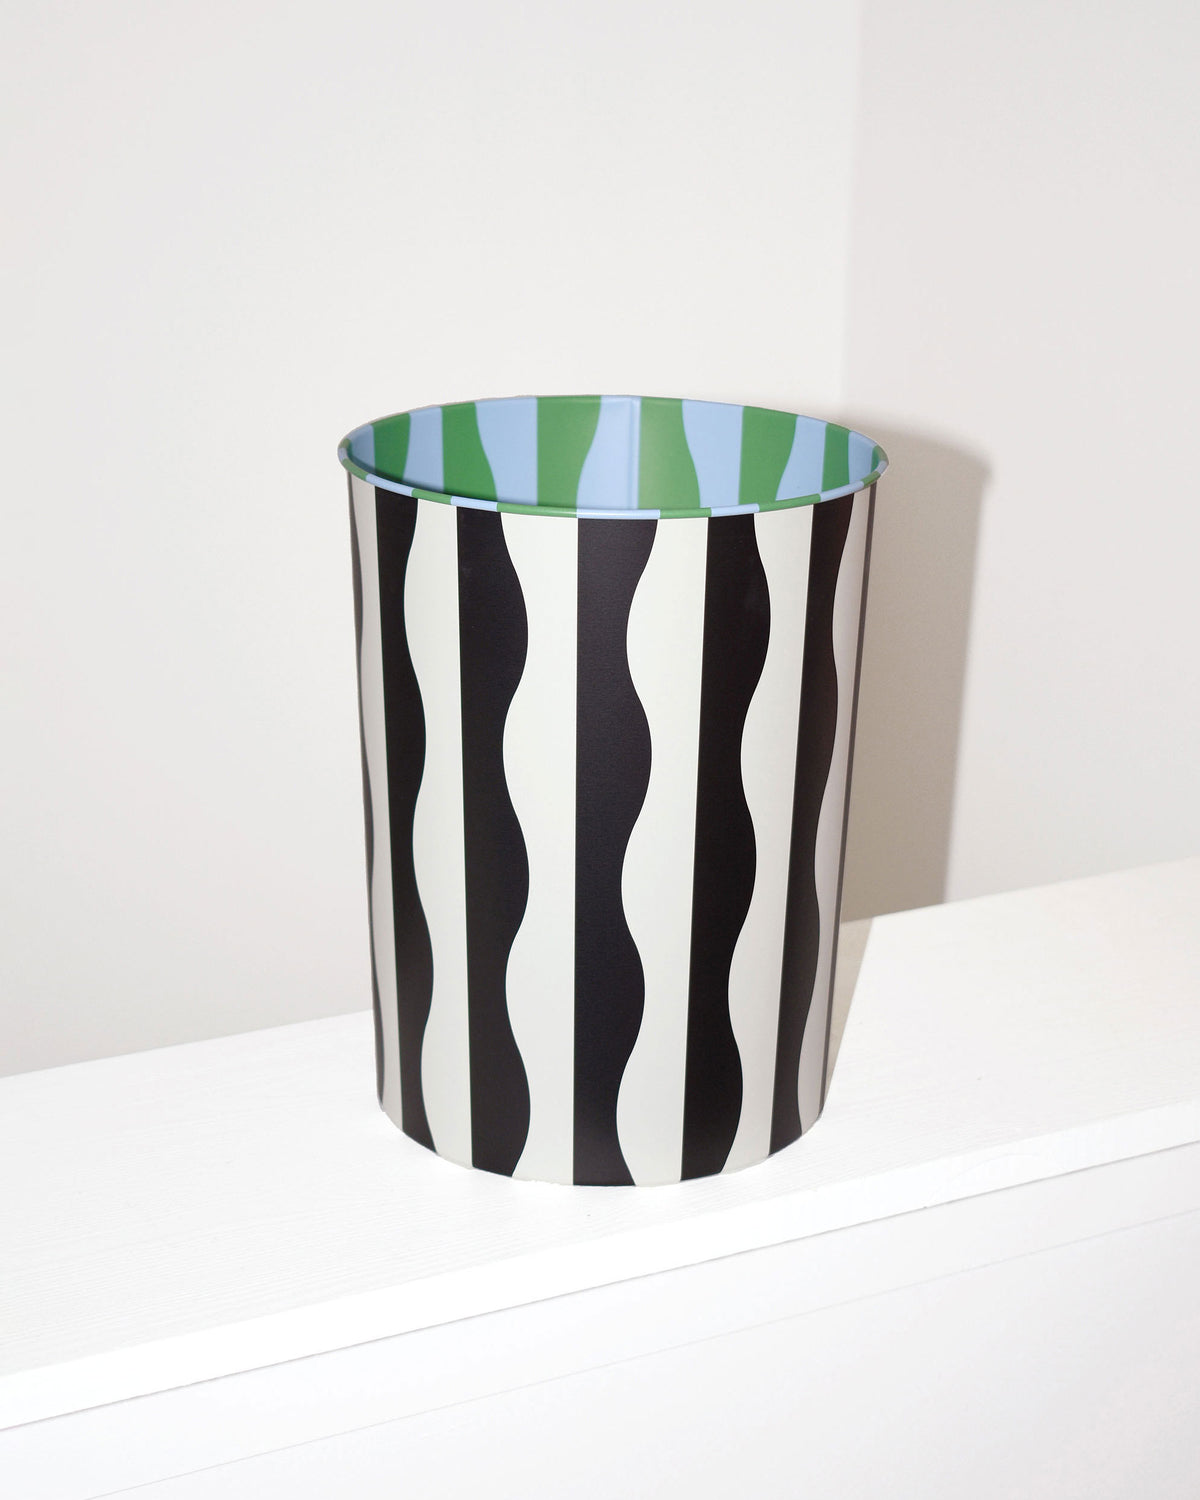 River Pattern Bin. Patterned wastepaper bin made in collaboration with Areaware. Great for use in office or bathroom. 100% tin. 8.25 in x 10.5 in. Made in China. Not eligible for international shipping.